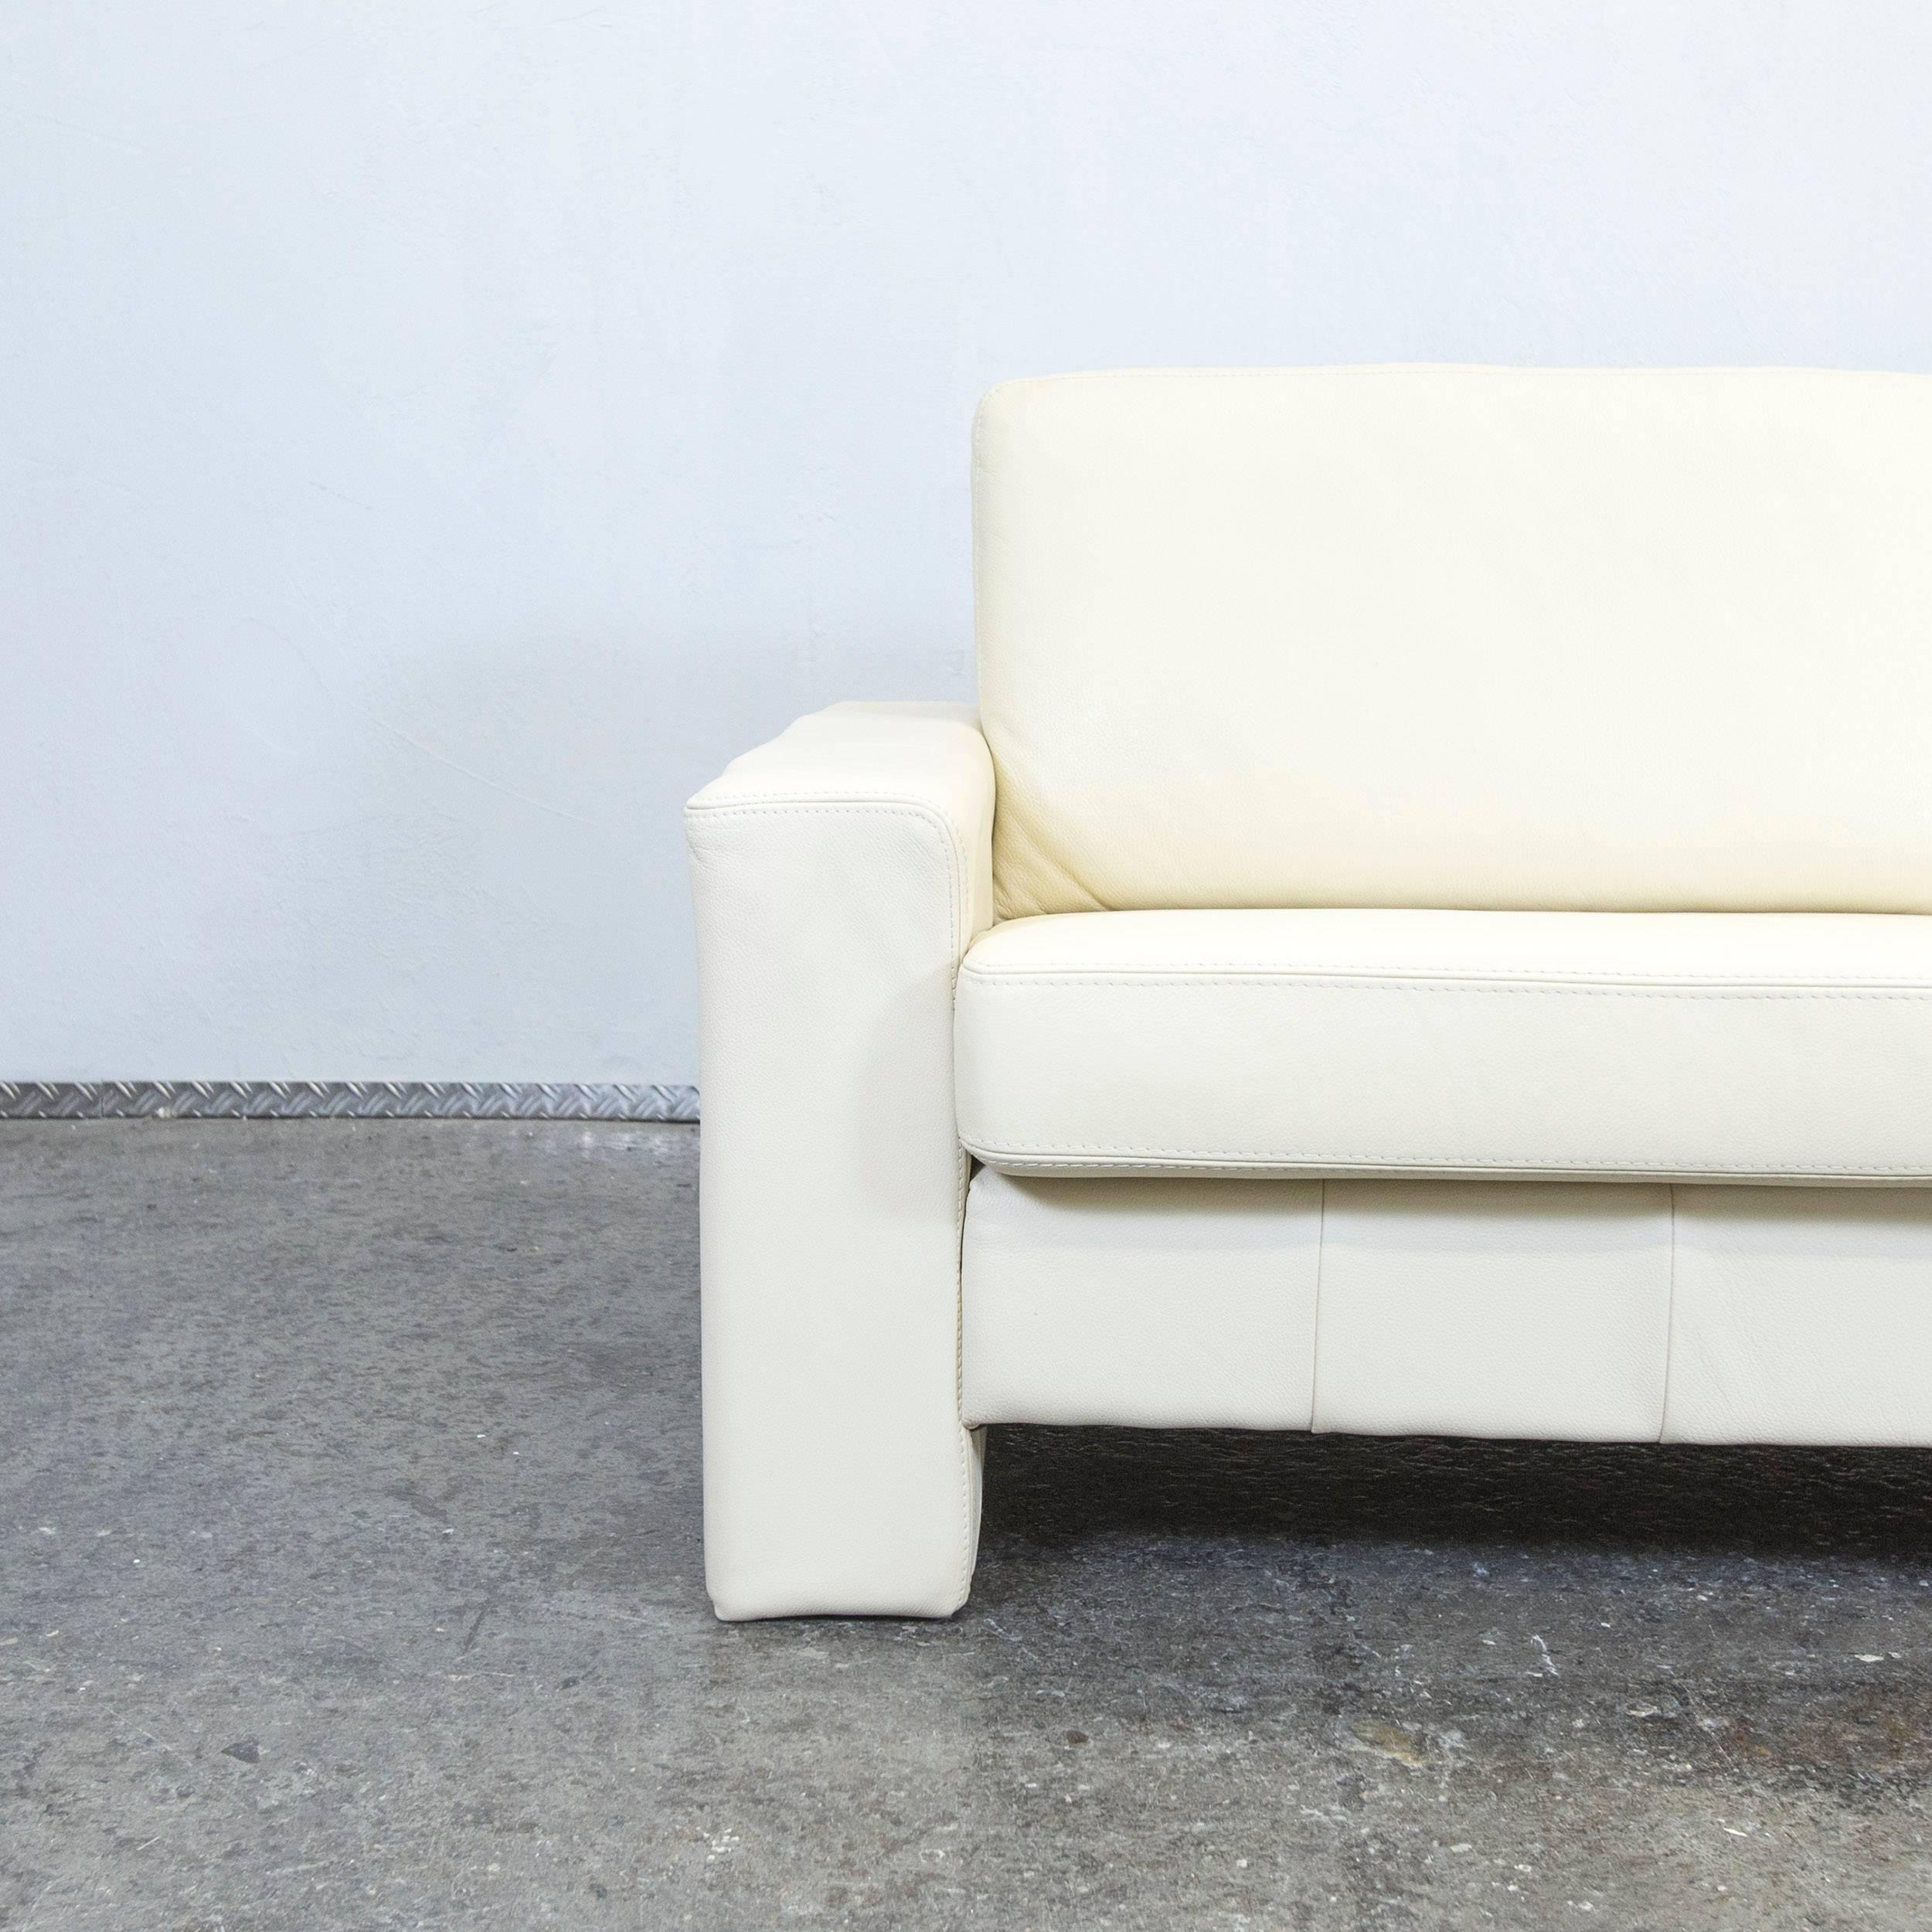 Crème white colored designer leather sofa in a minimalistic and modern style, designed for pure comfort.